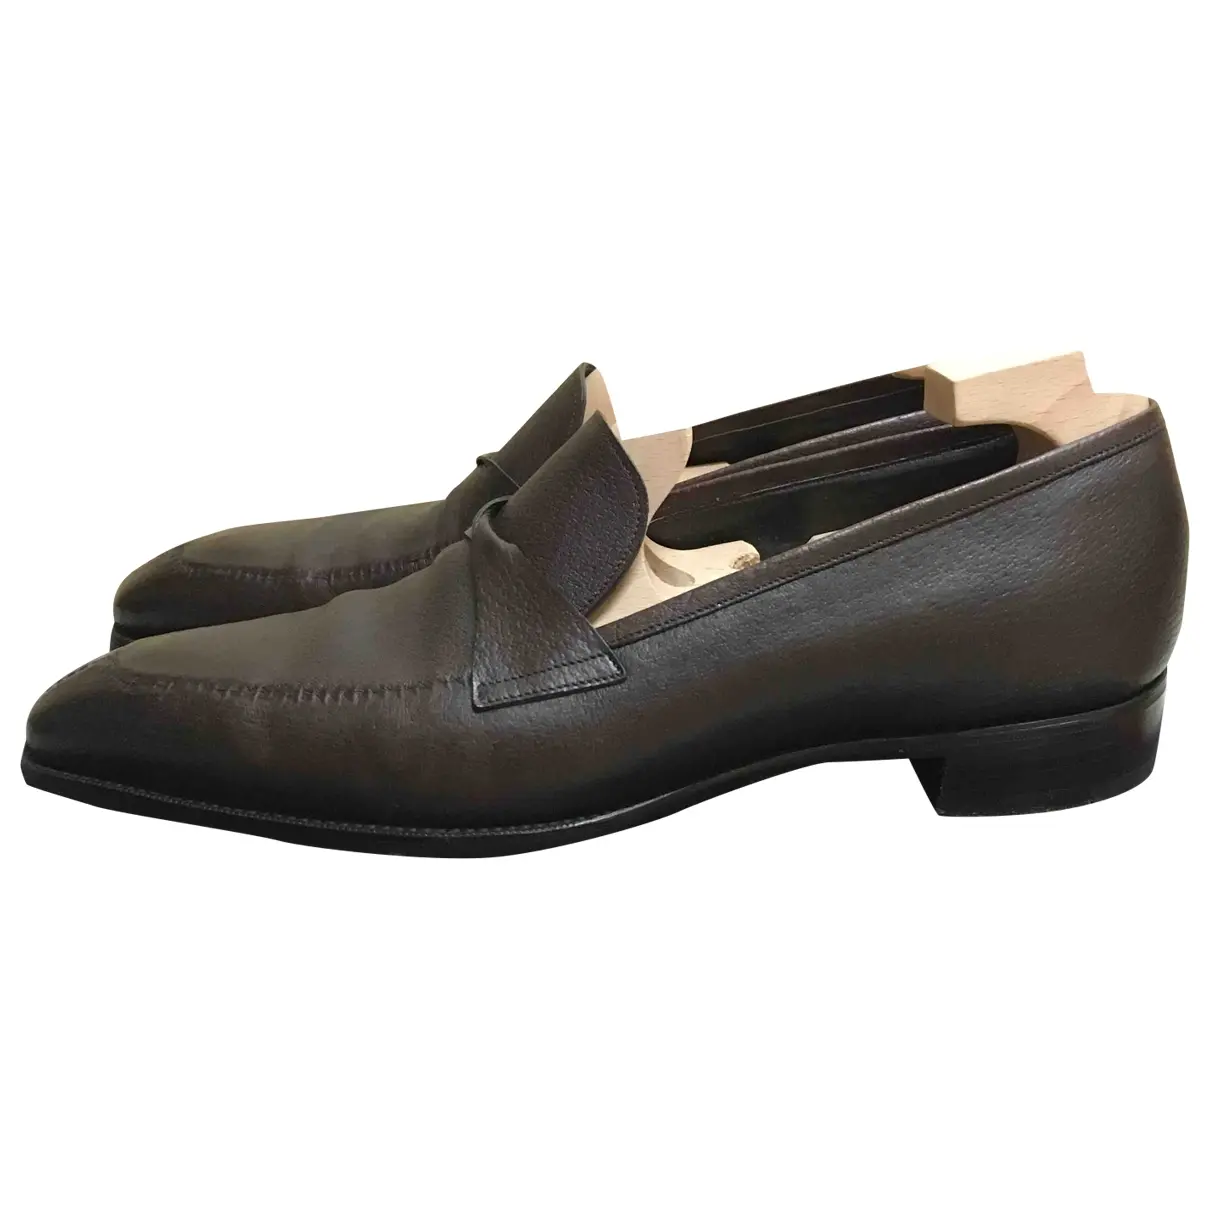 Leather flats Gaziano & Girling